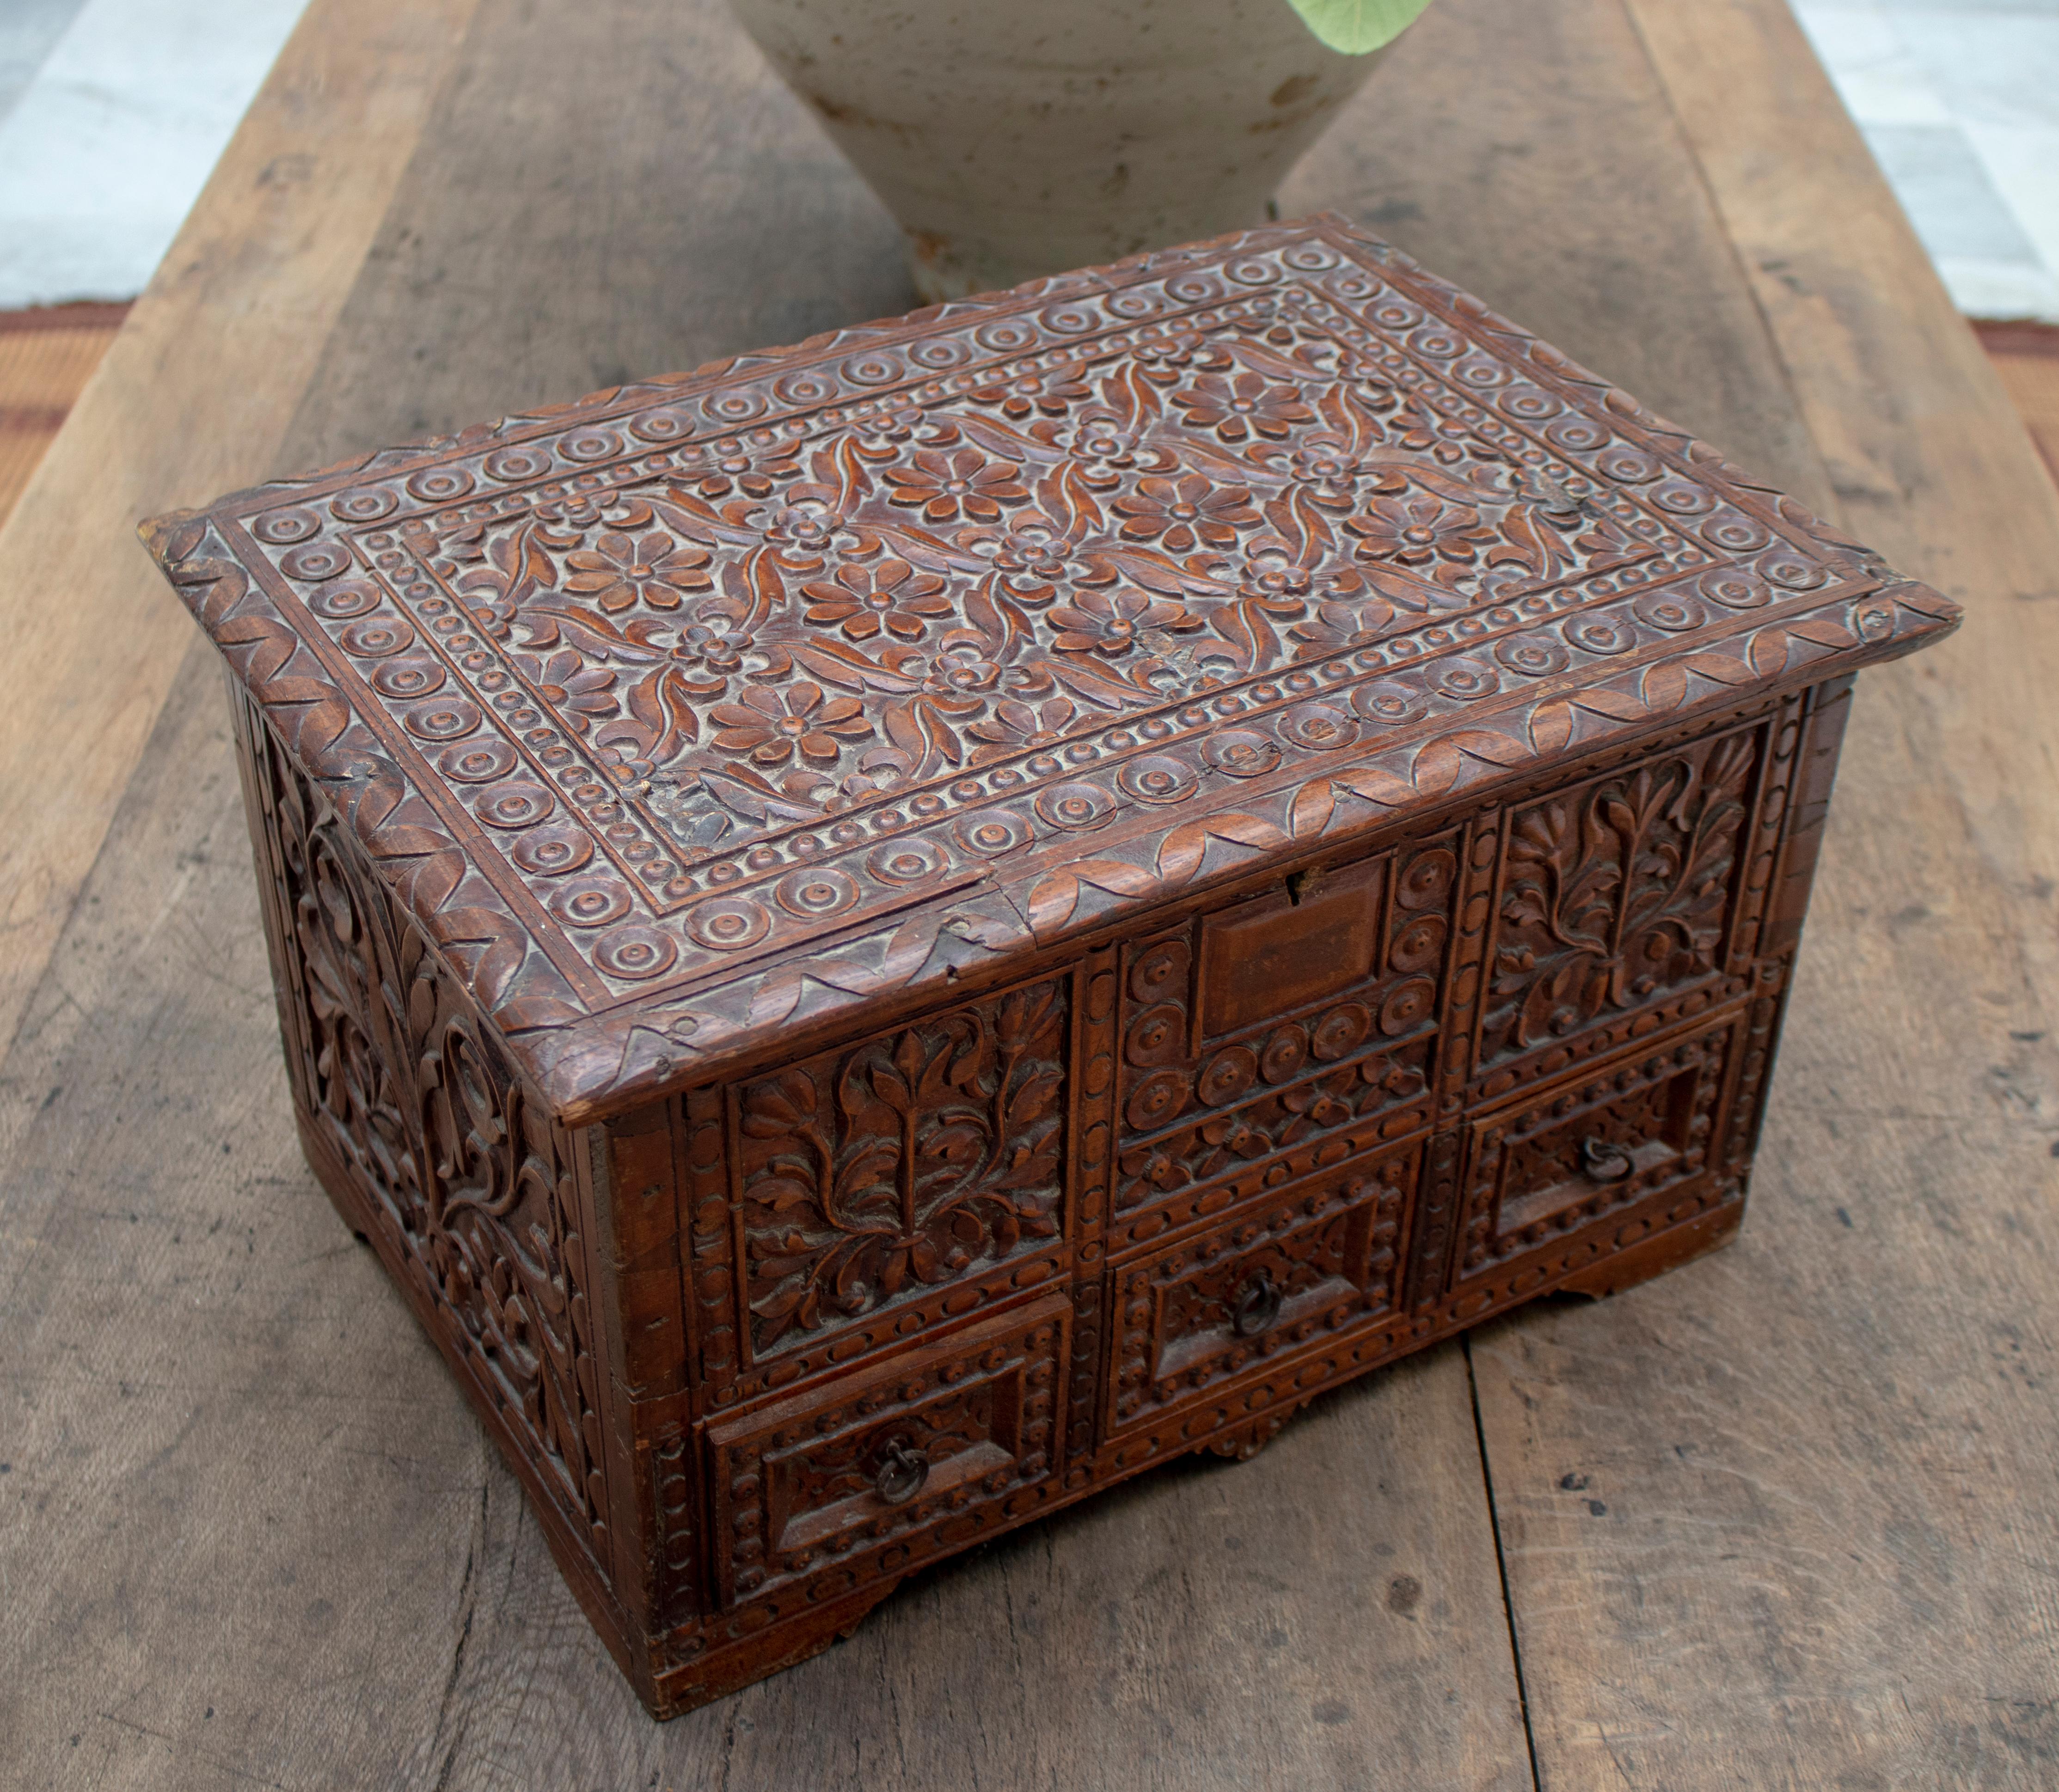 19th century Anglo-Indian hand carved tropical wood box.